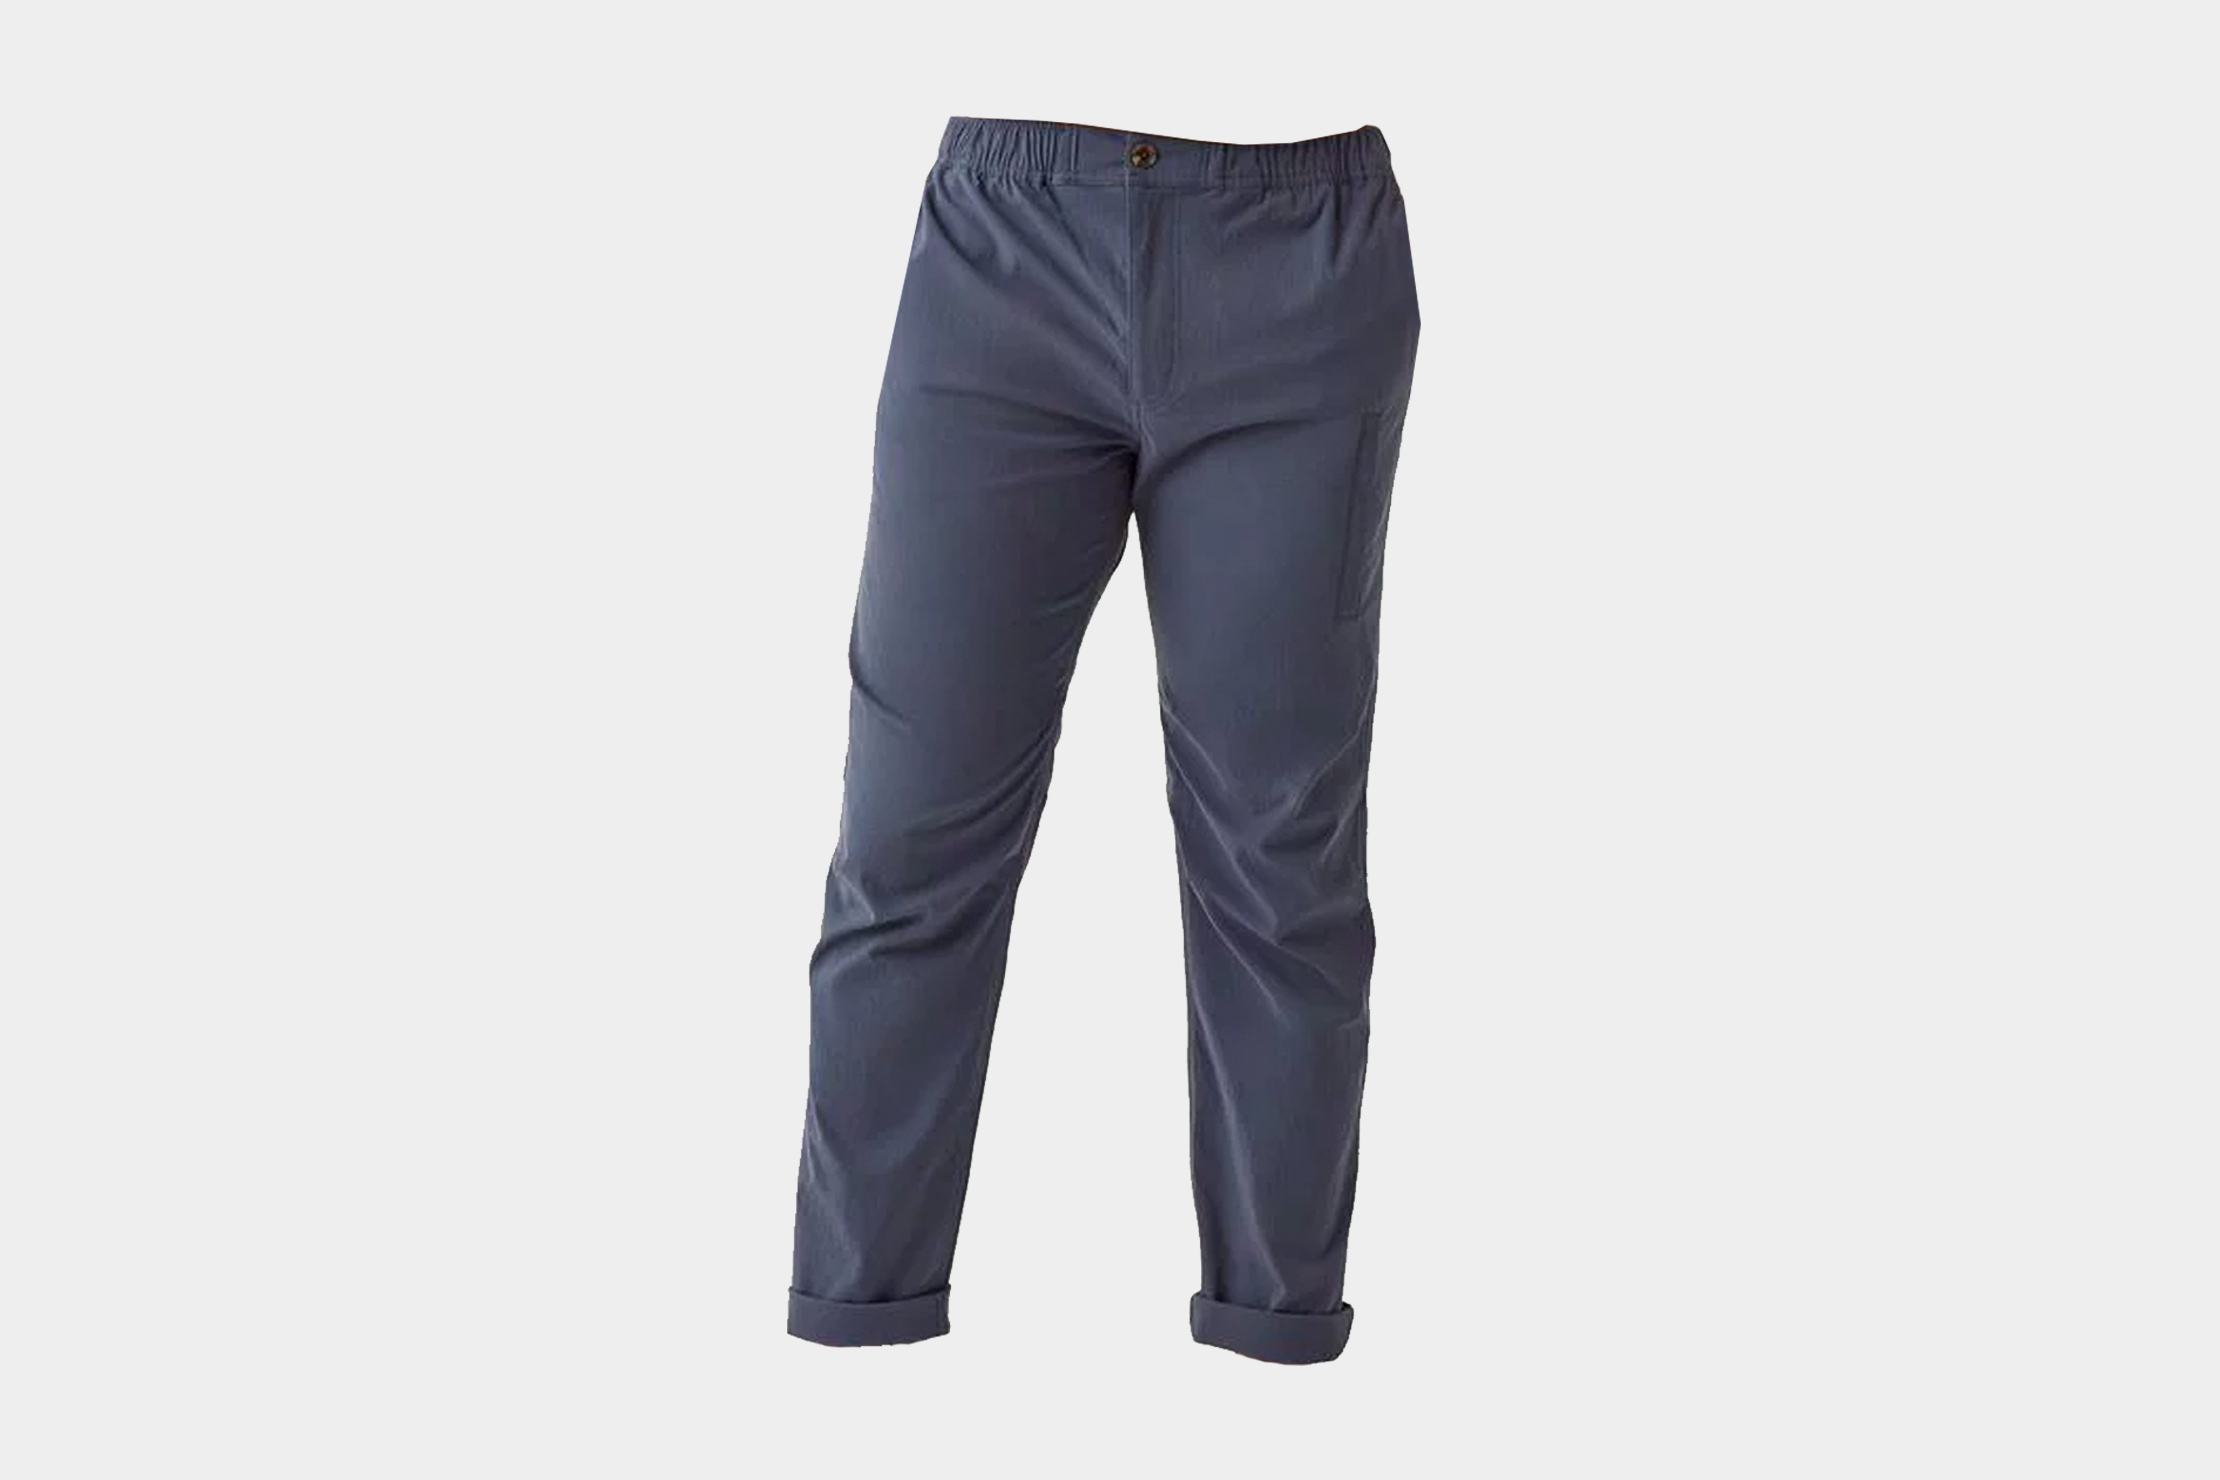 Olivers Compass Pant Review